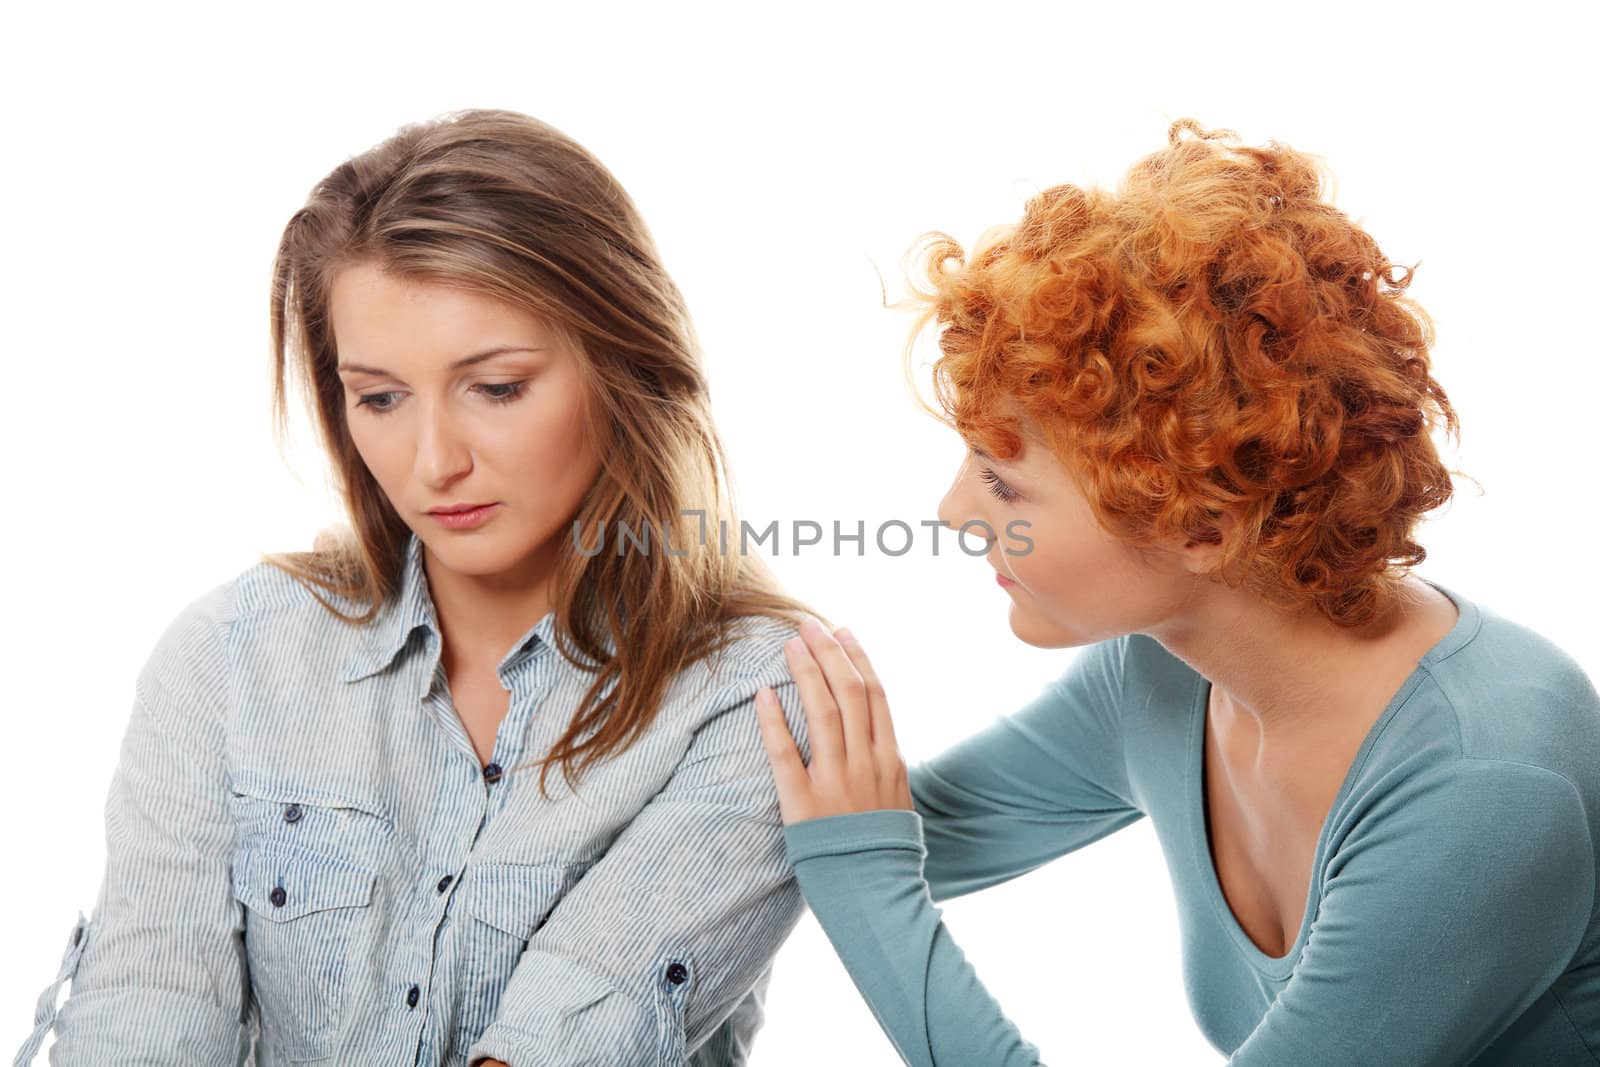 Troubled young girl comforted by her friend by BDS